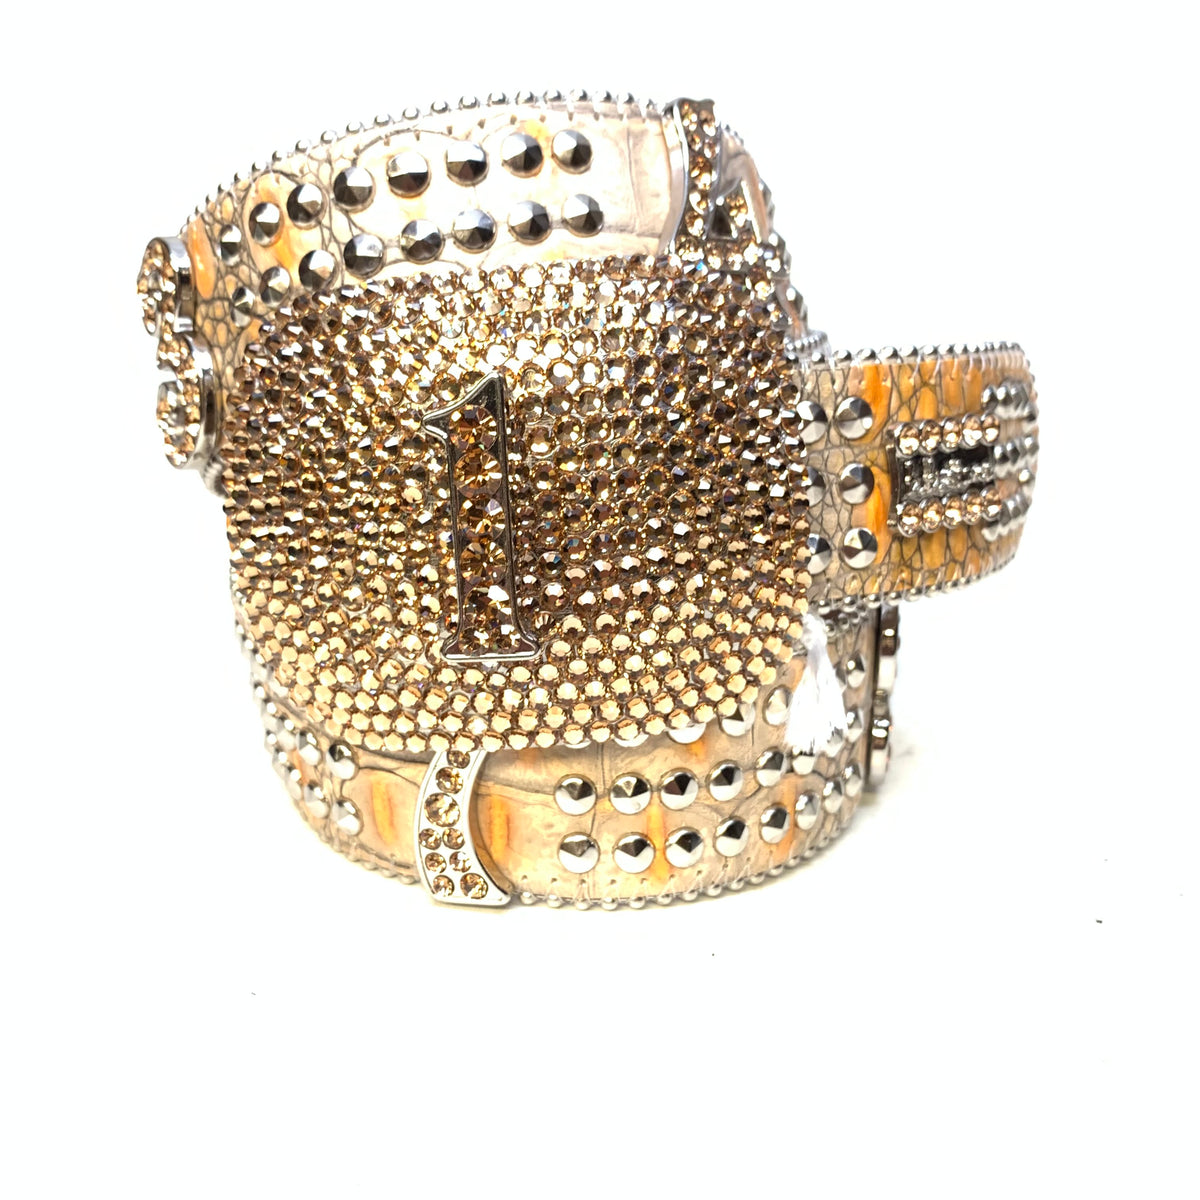 b.b. Simon "Gold Numbers" Studded Crystal Belt - Dudes Boutique